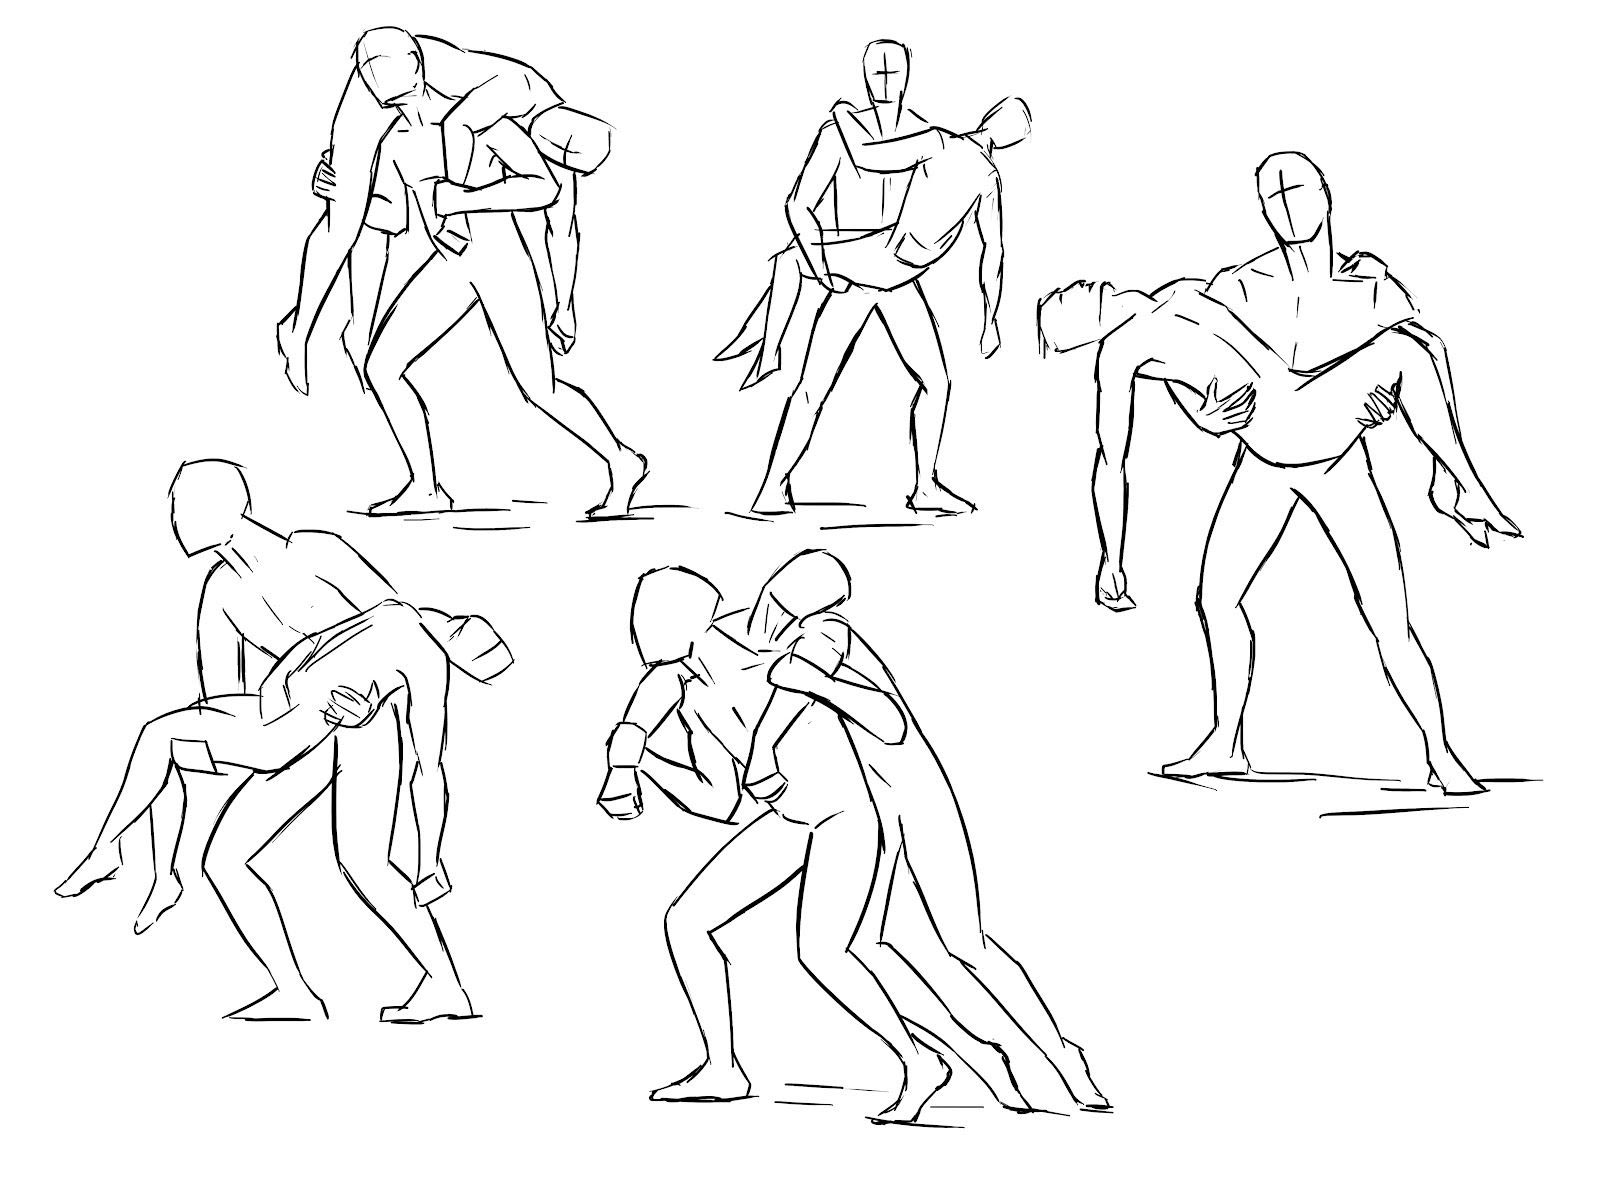 Carry pose drawing reference